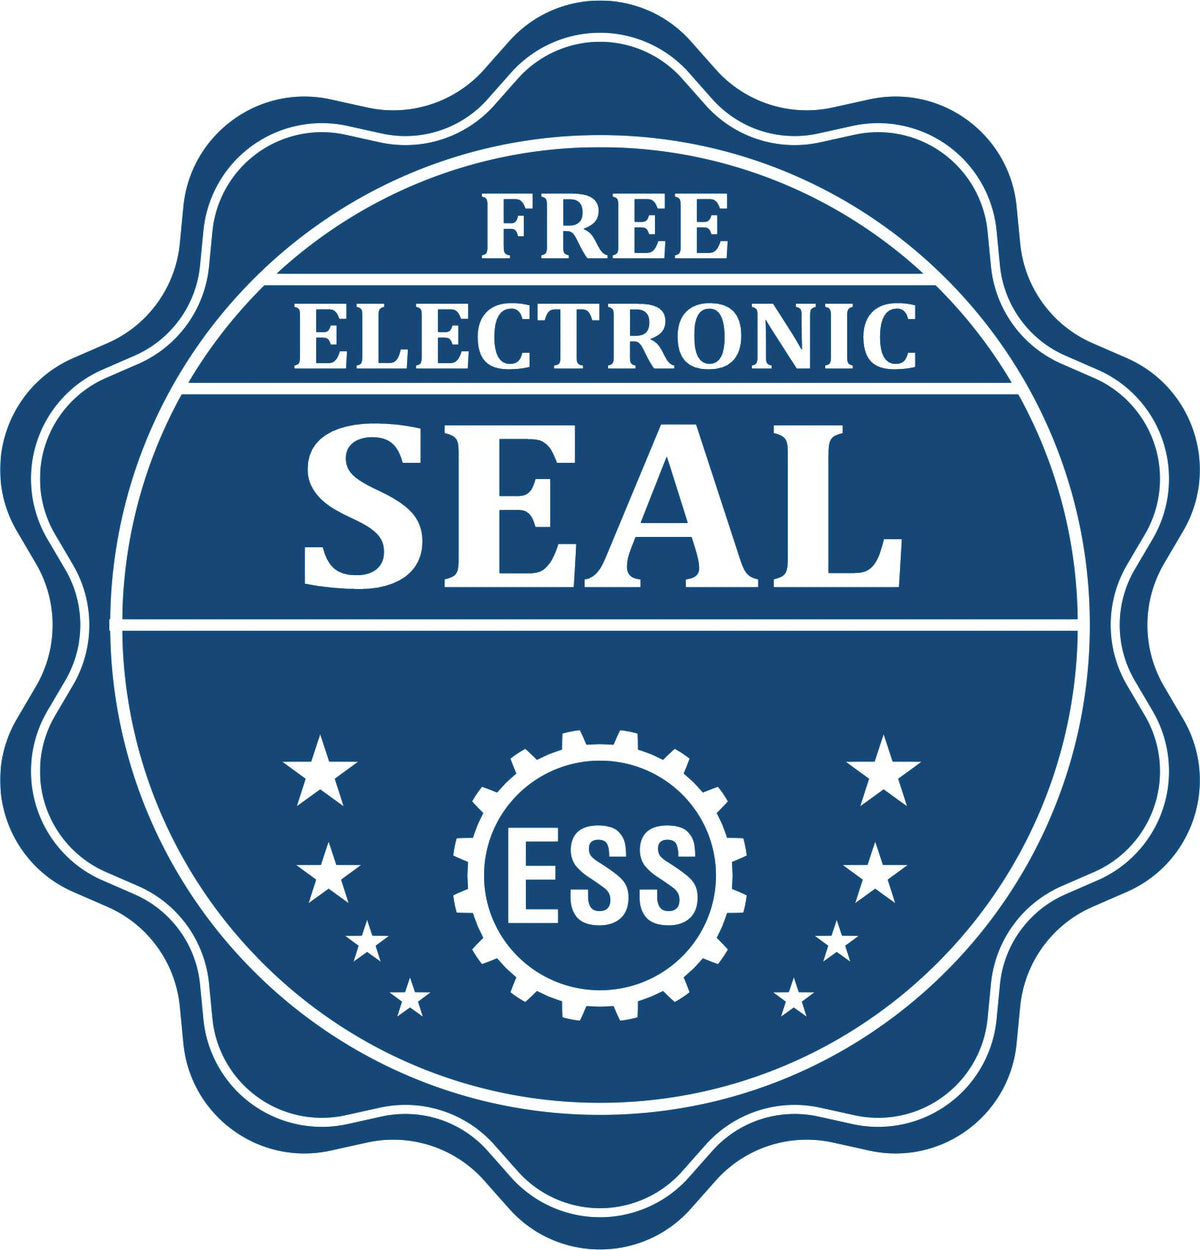 A badge showing a free electronic seal for the PSI North Dakota Notary Stamp with stars and the ESS gear on the emblem.